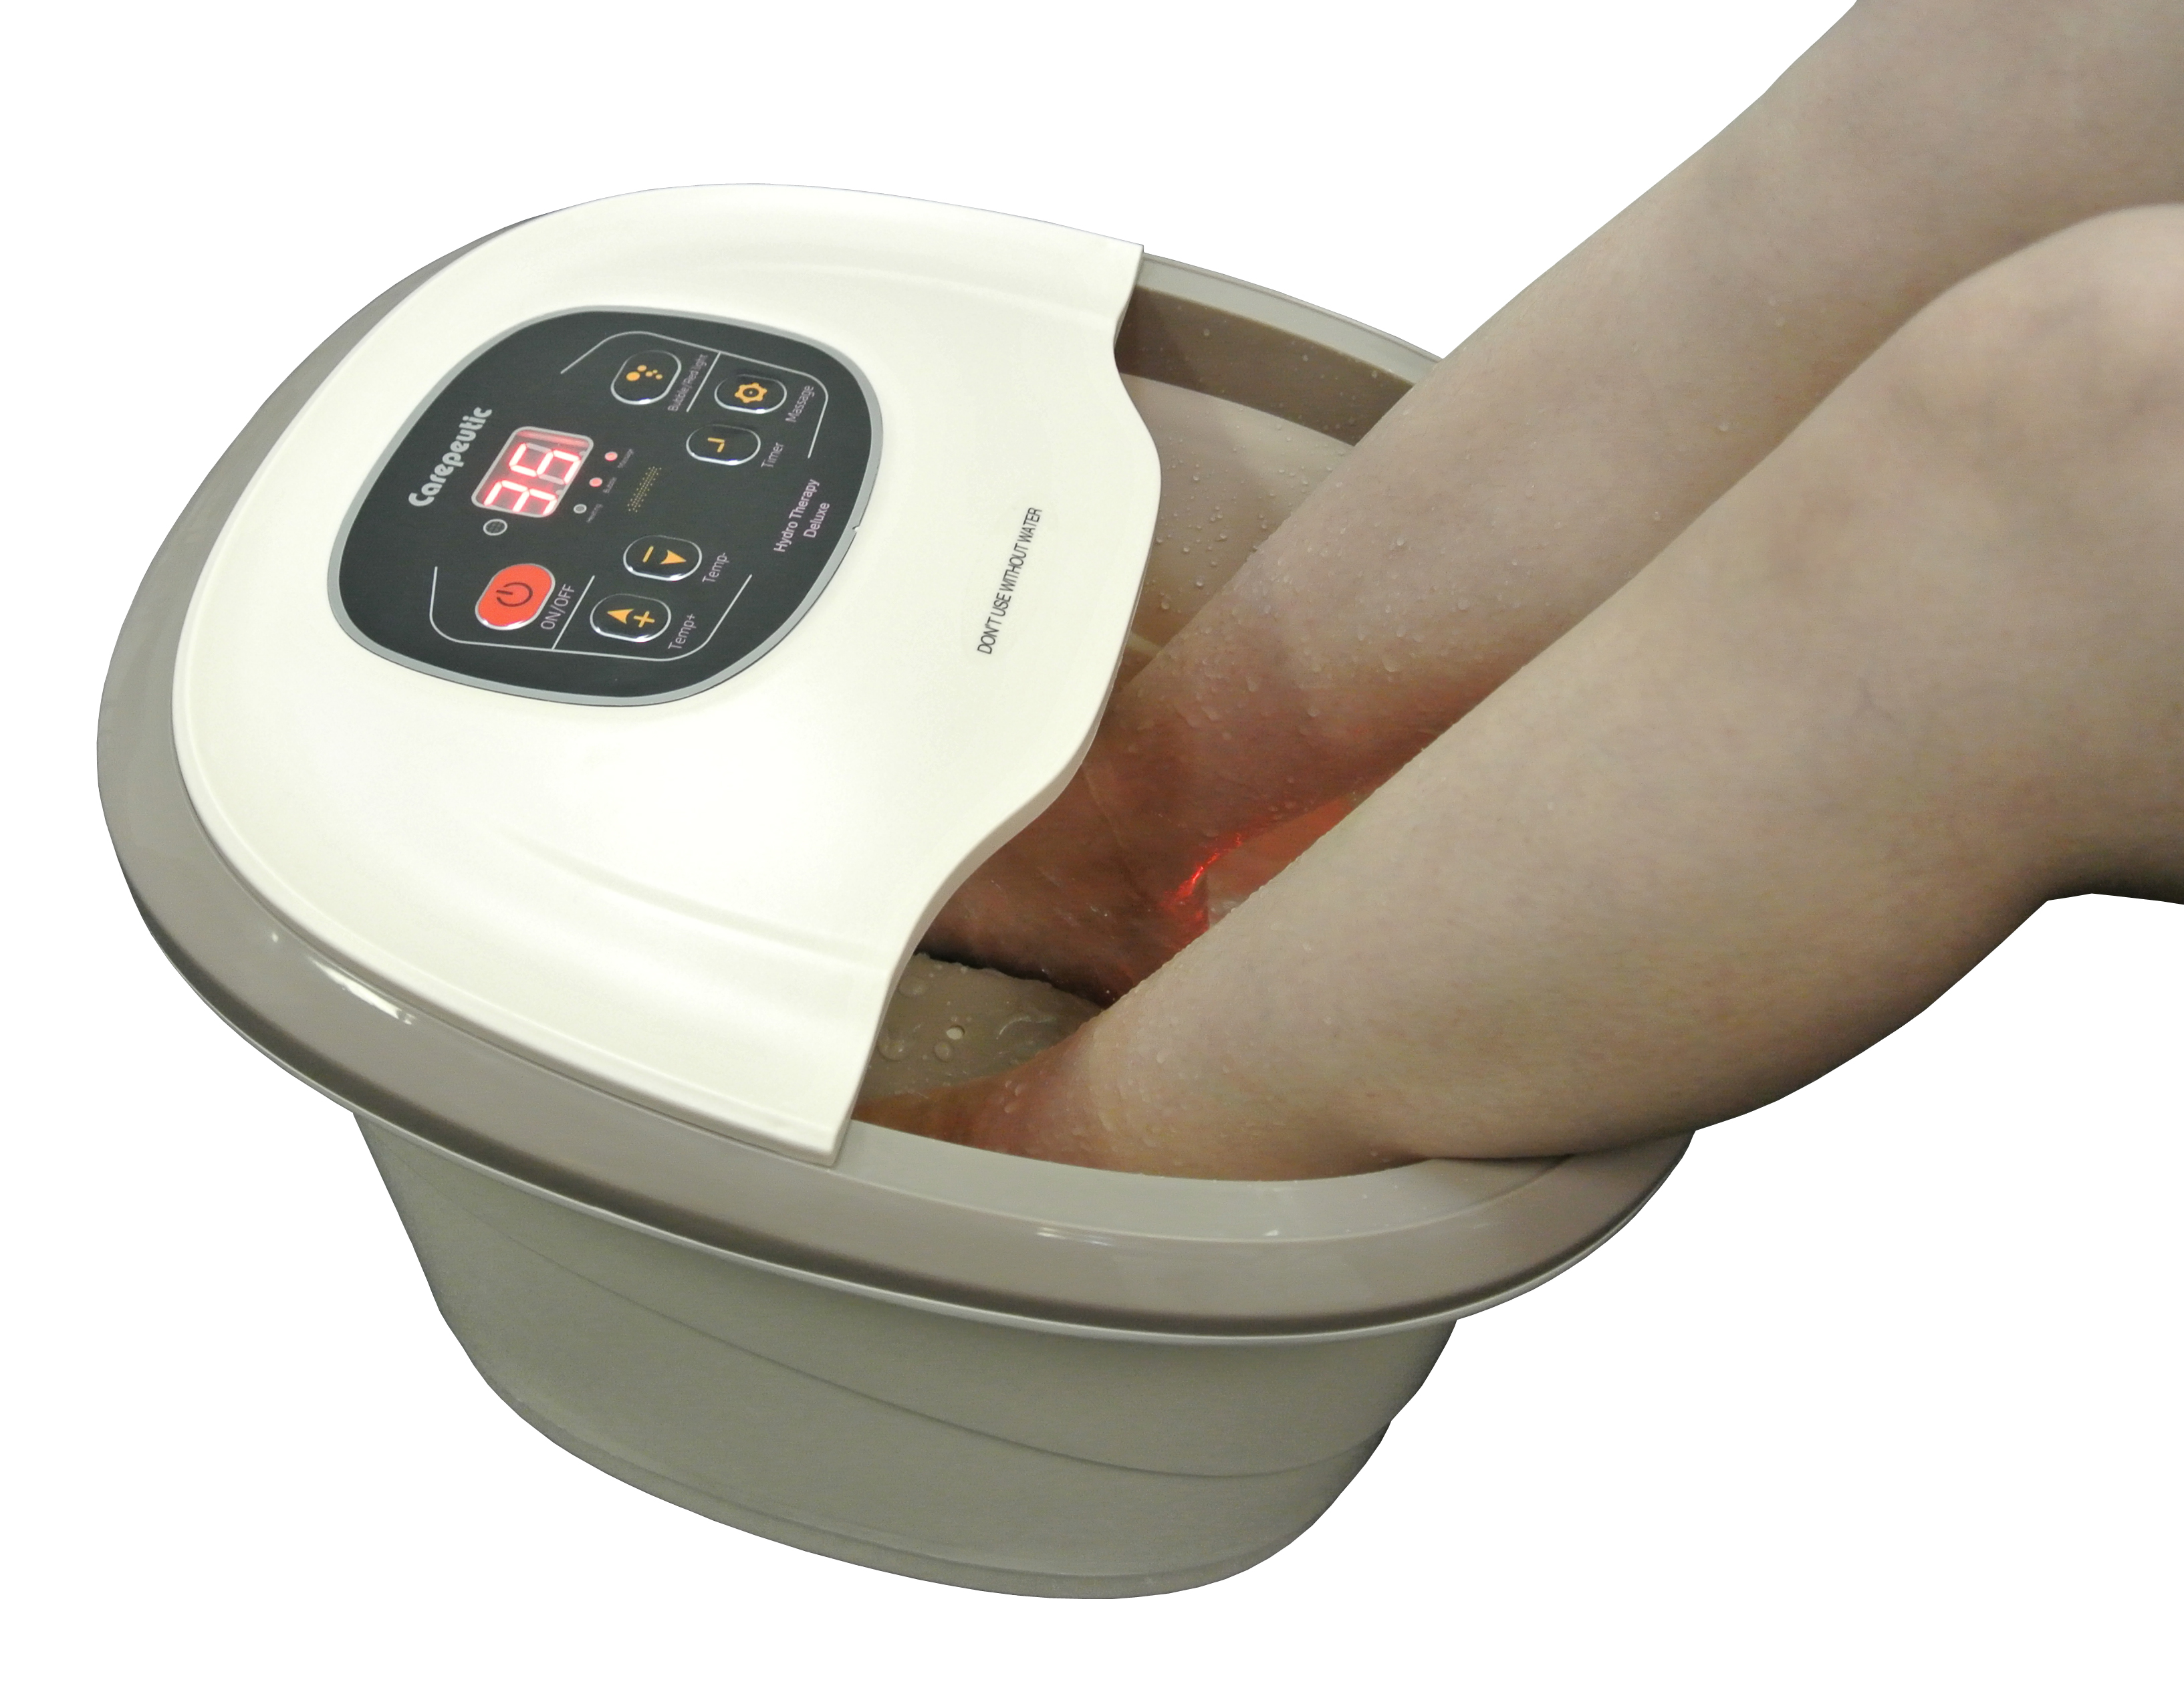 Carepeutic Deluxe Hydro Therapy Foot and Leg Spa Bath Massager (Milk-White)